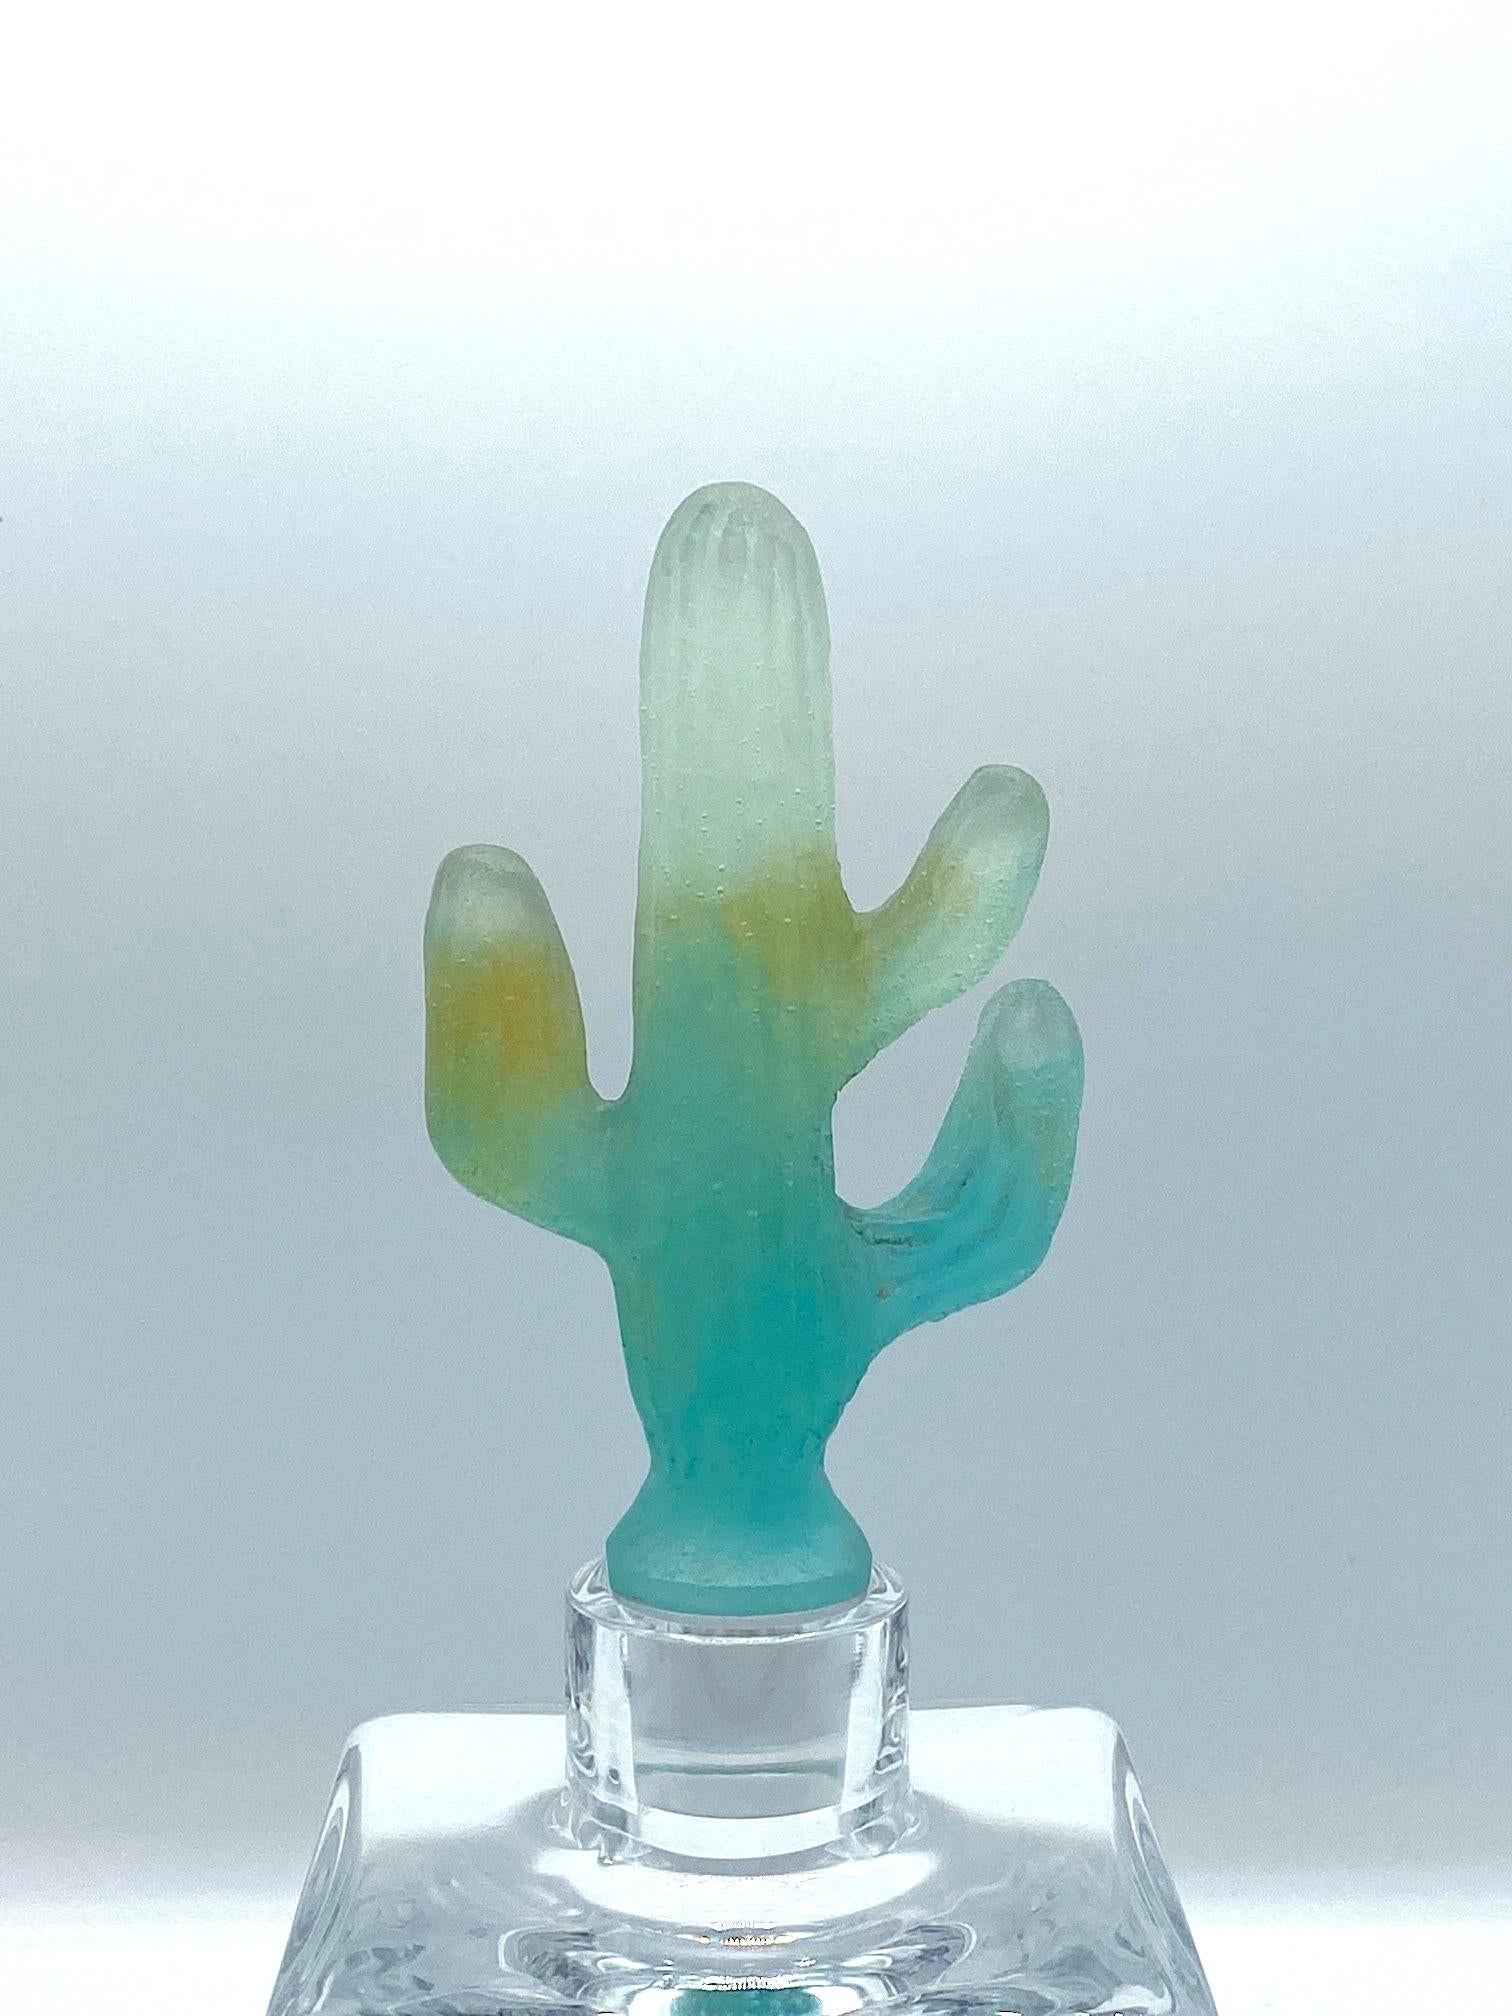 Rare, unique and highly collectible Daum crystal decanter with a pâte de verre cactus shaped stopper. The designer Joseph Hilton McConnico began his collaboration with Daum France in 1987, and was the first American whose work became part of the